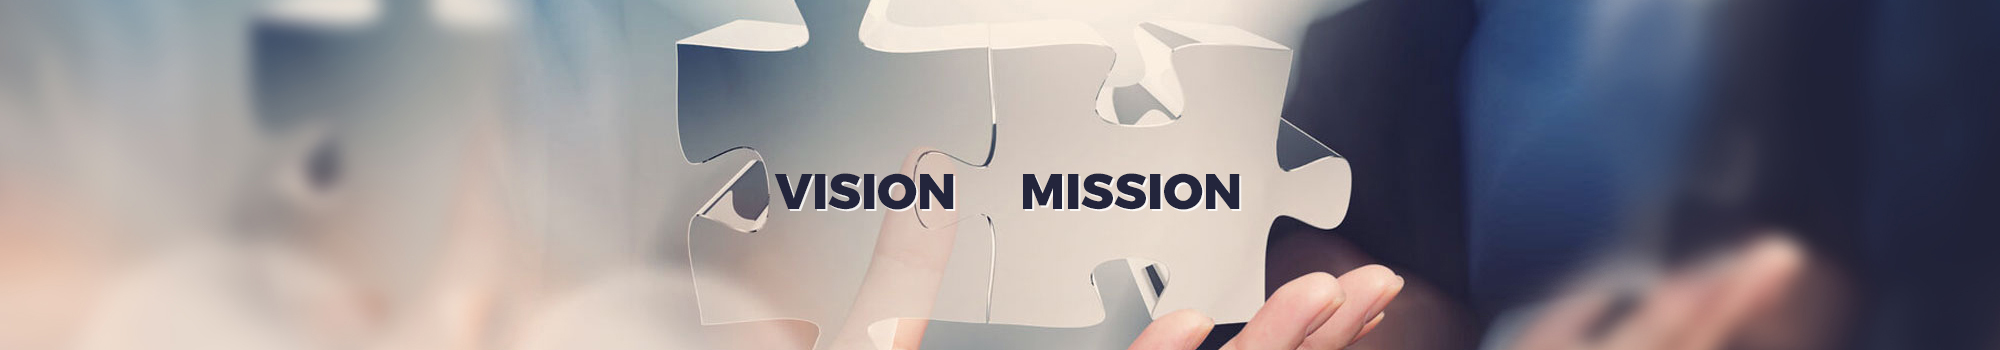 MISSION AND VISION